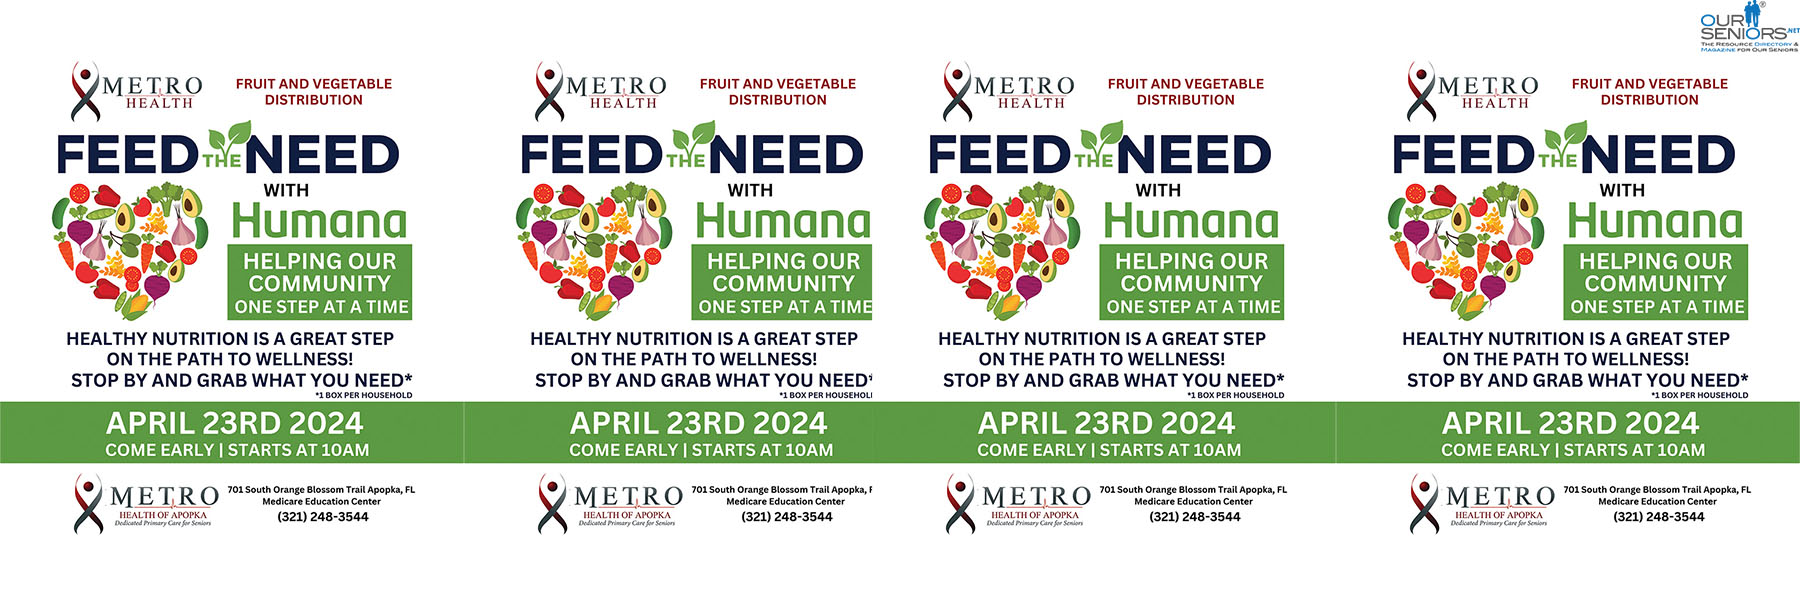 MetroHealth Feed The Need Event April 23 2024 Slider